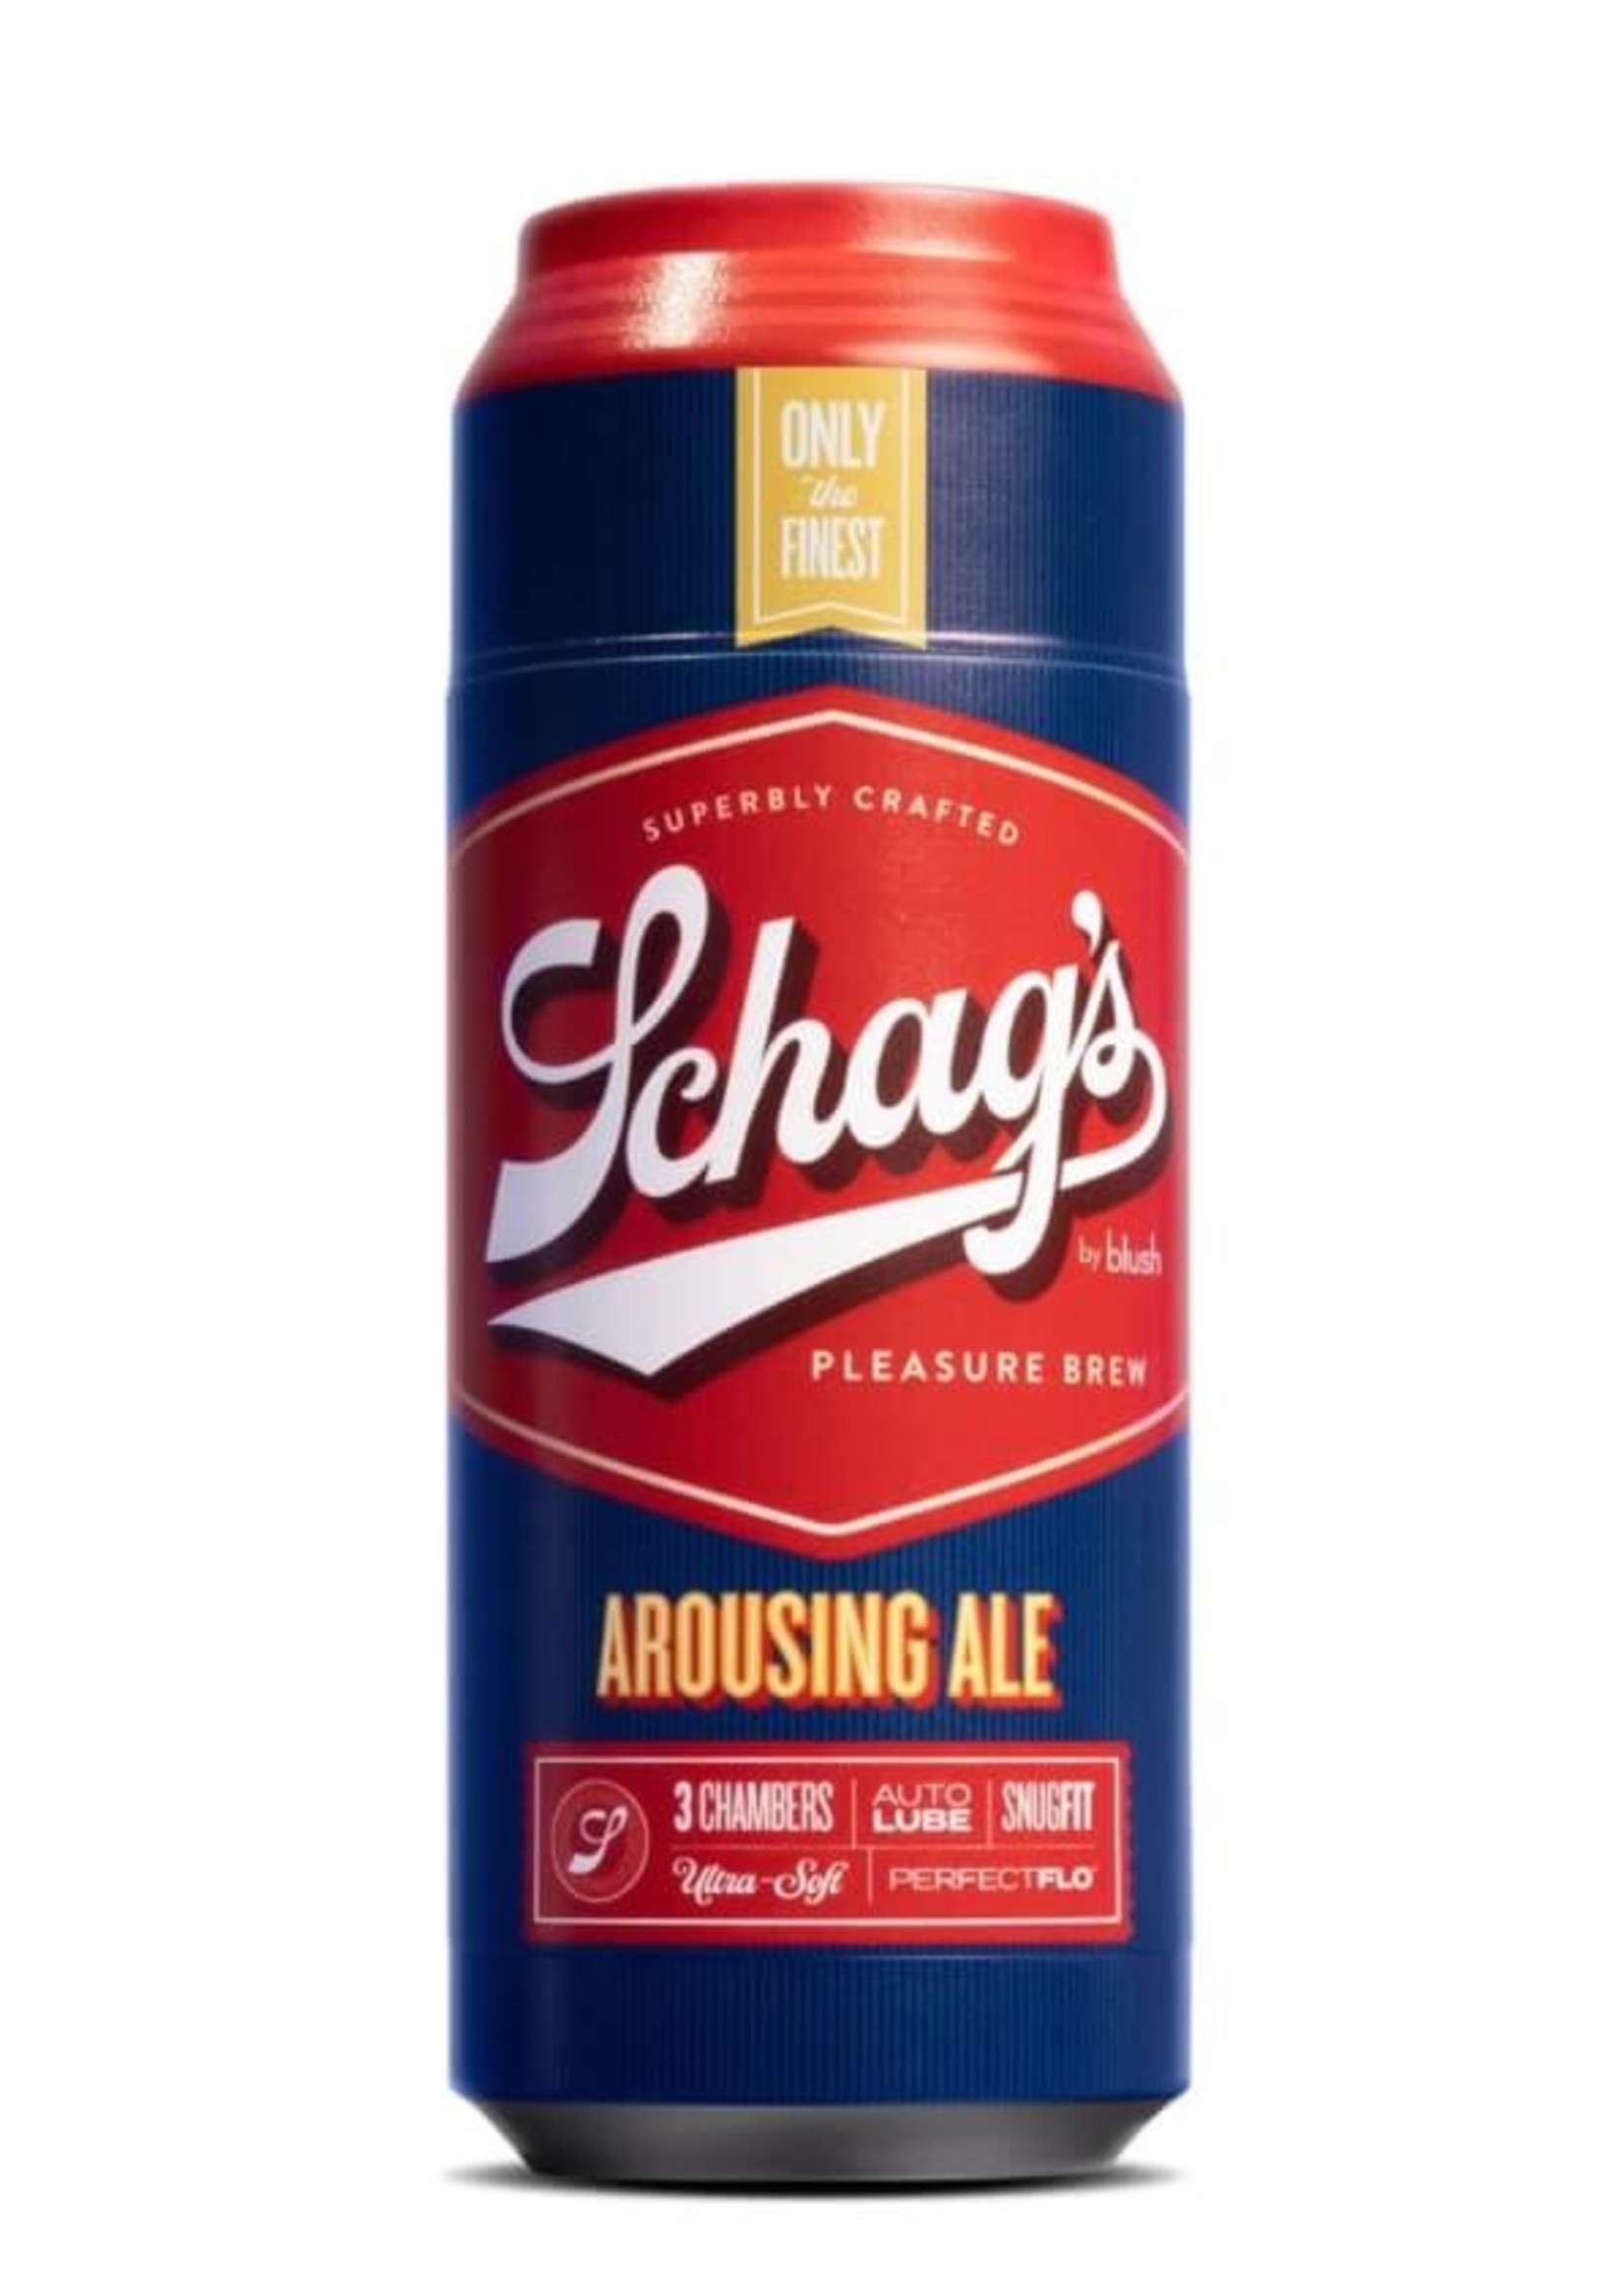 Blush Novelties Schag’s - Arousing Ale - Frosted